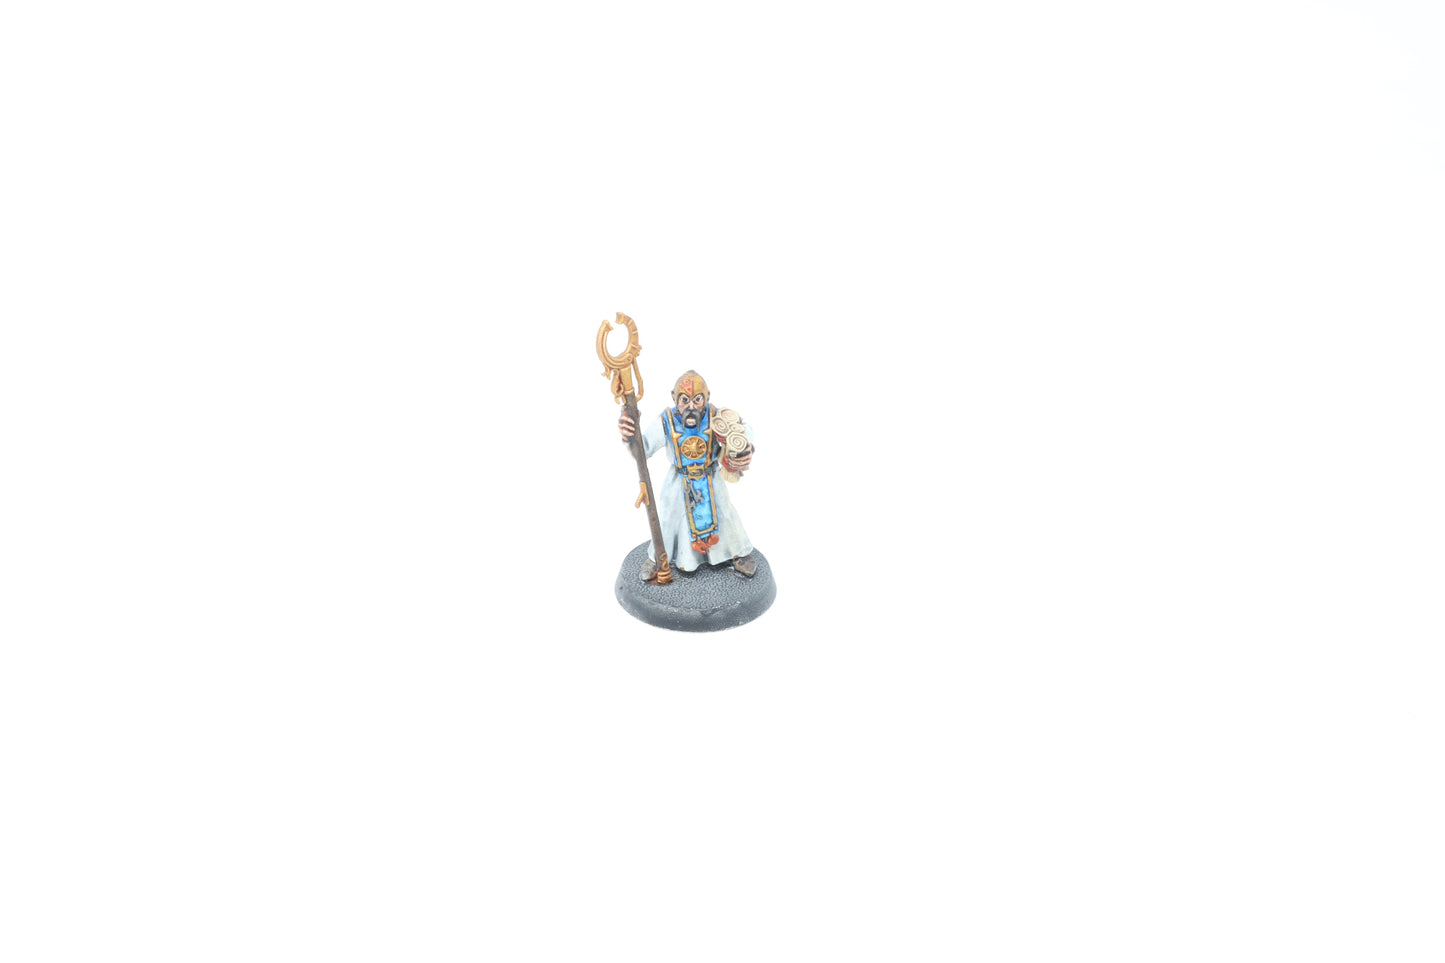 White Battlemage on foot (Tabletop)